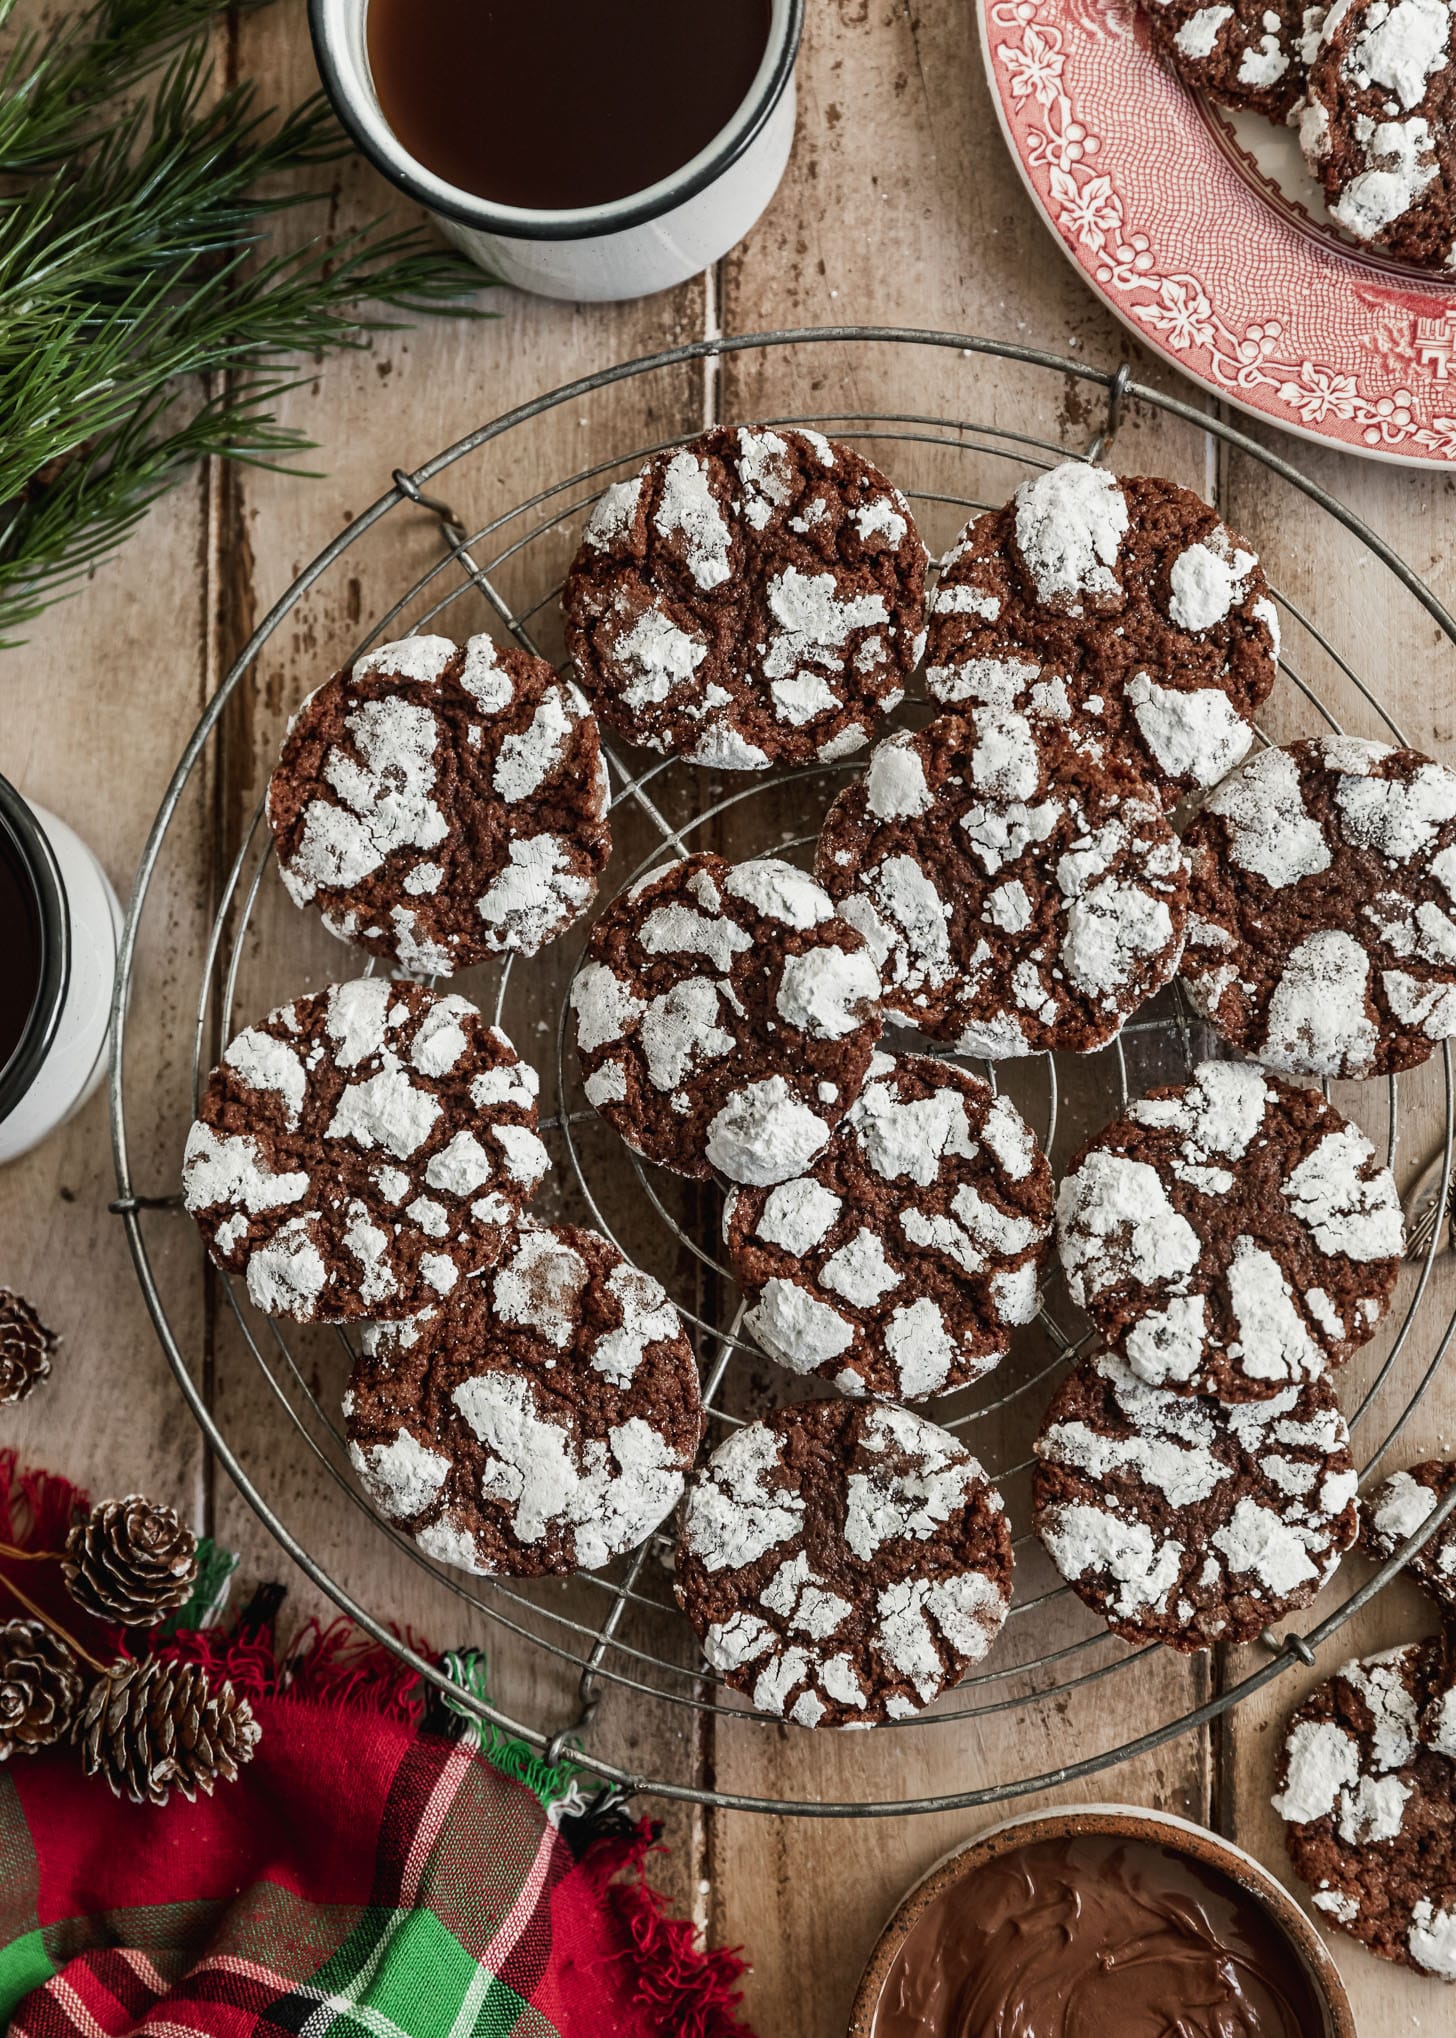 A wire rack of mocha crinkle cookies on a wood table next to a red plaid linen, pinecones, a white bowl of Nutella, and white mugs of coffee.